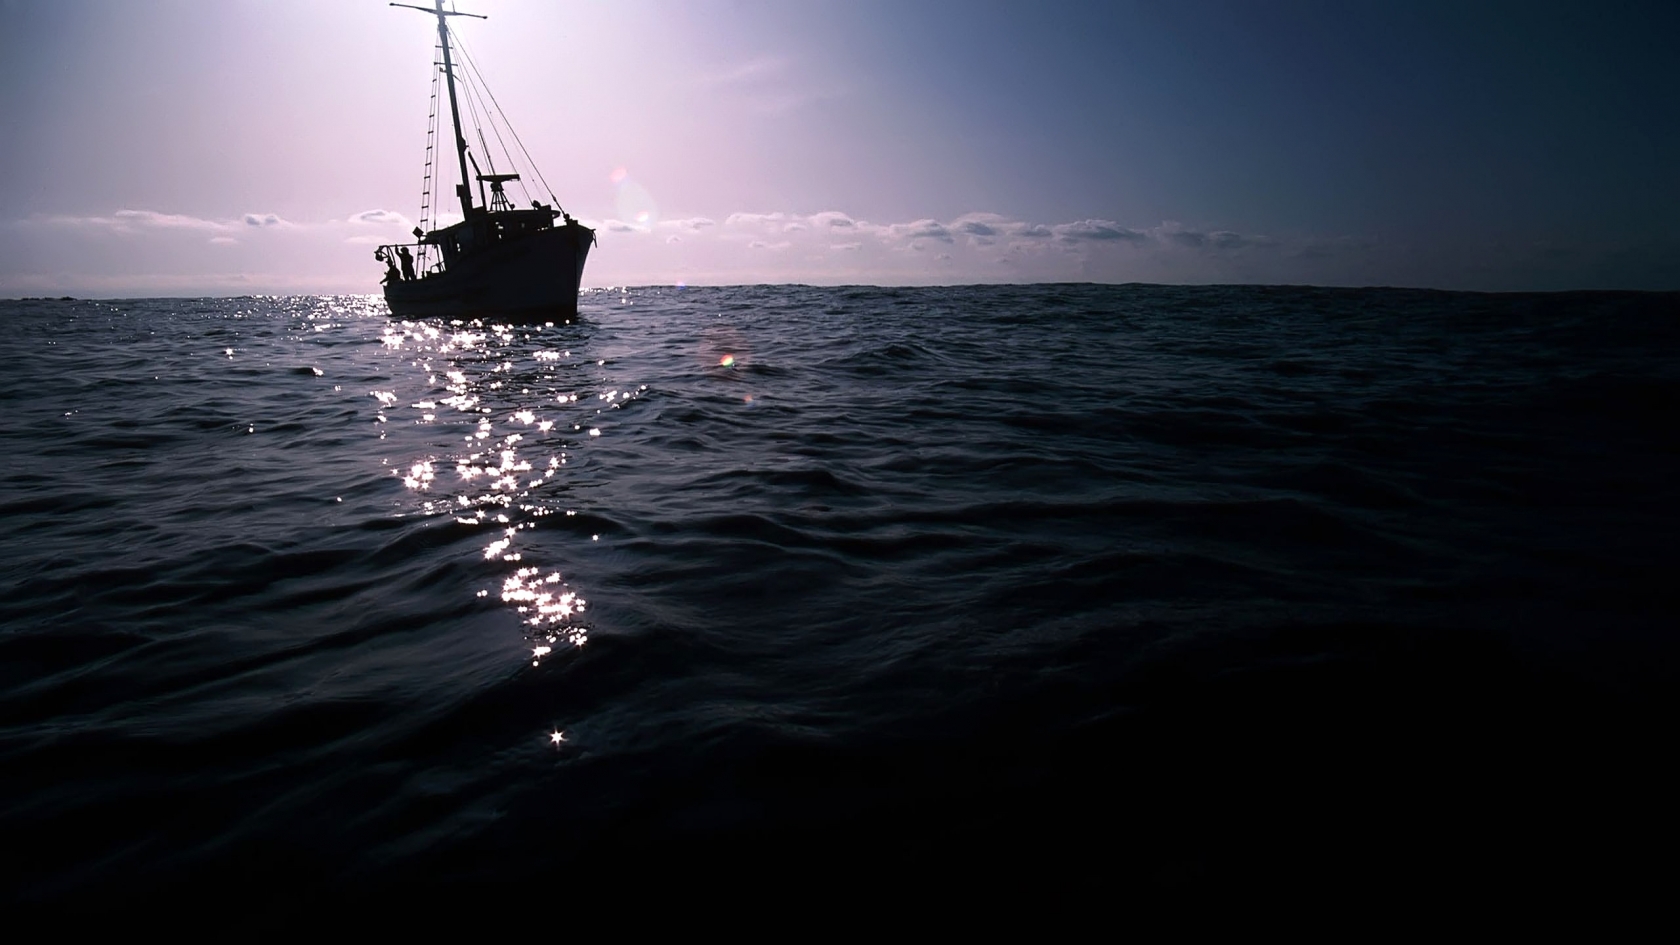 The Dark Boat on Sea for 1680 x 945 HDTV resolution